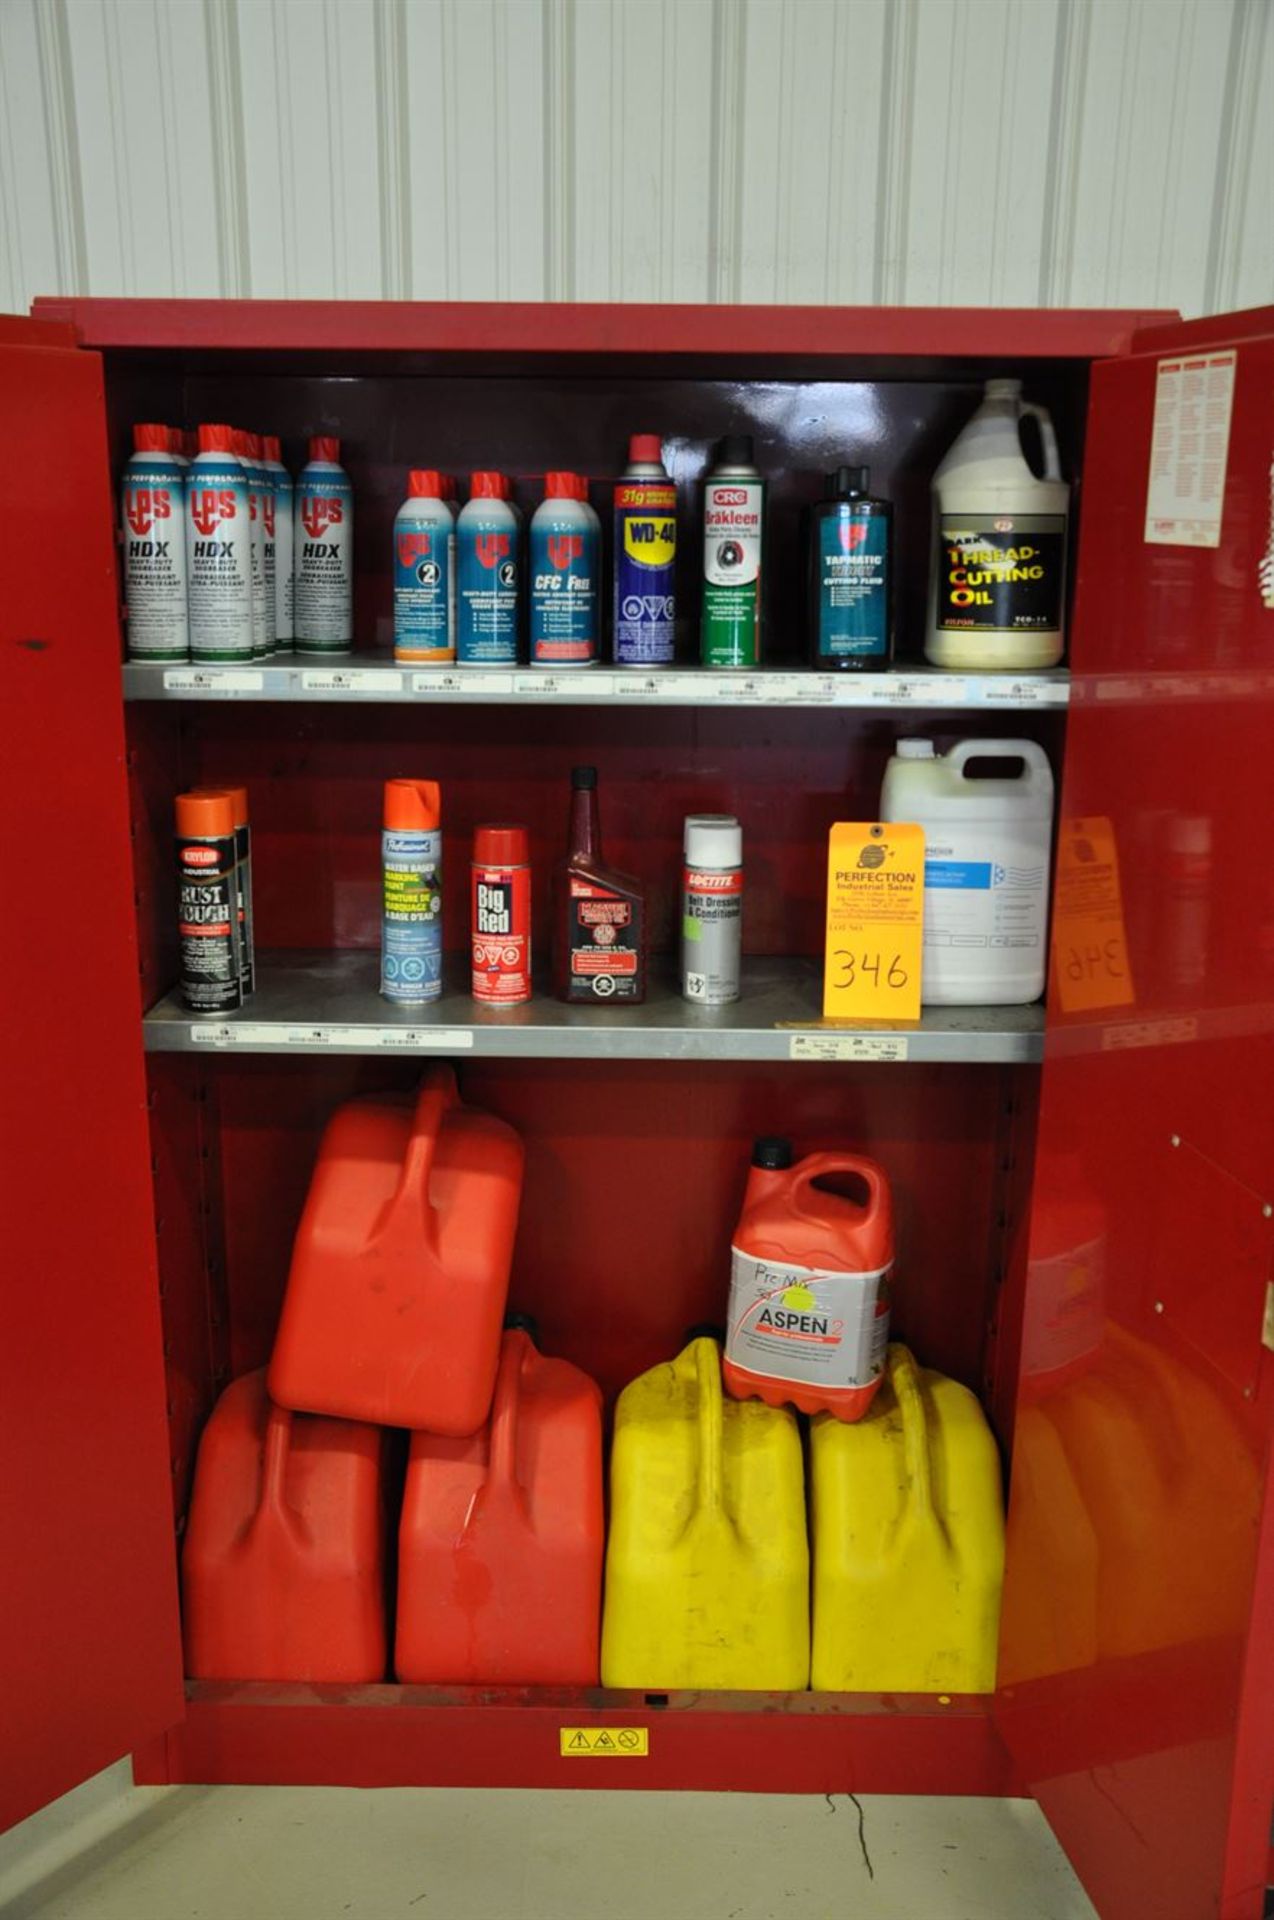 (12) cans of LPS Degreaser, assorted lubricants and cleaners, gasoline and Diesel "Jerry Cans".